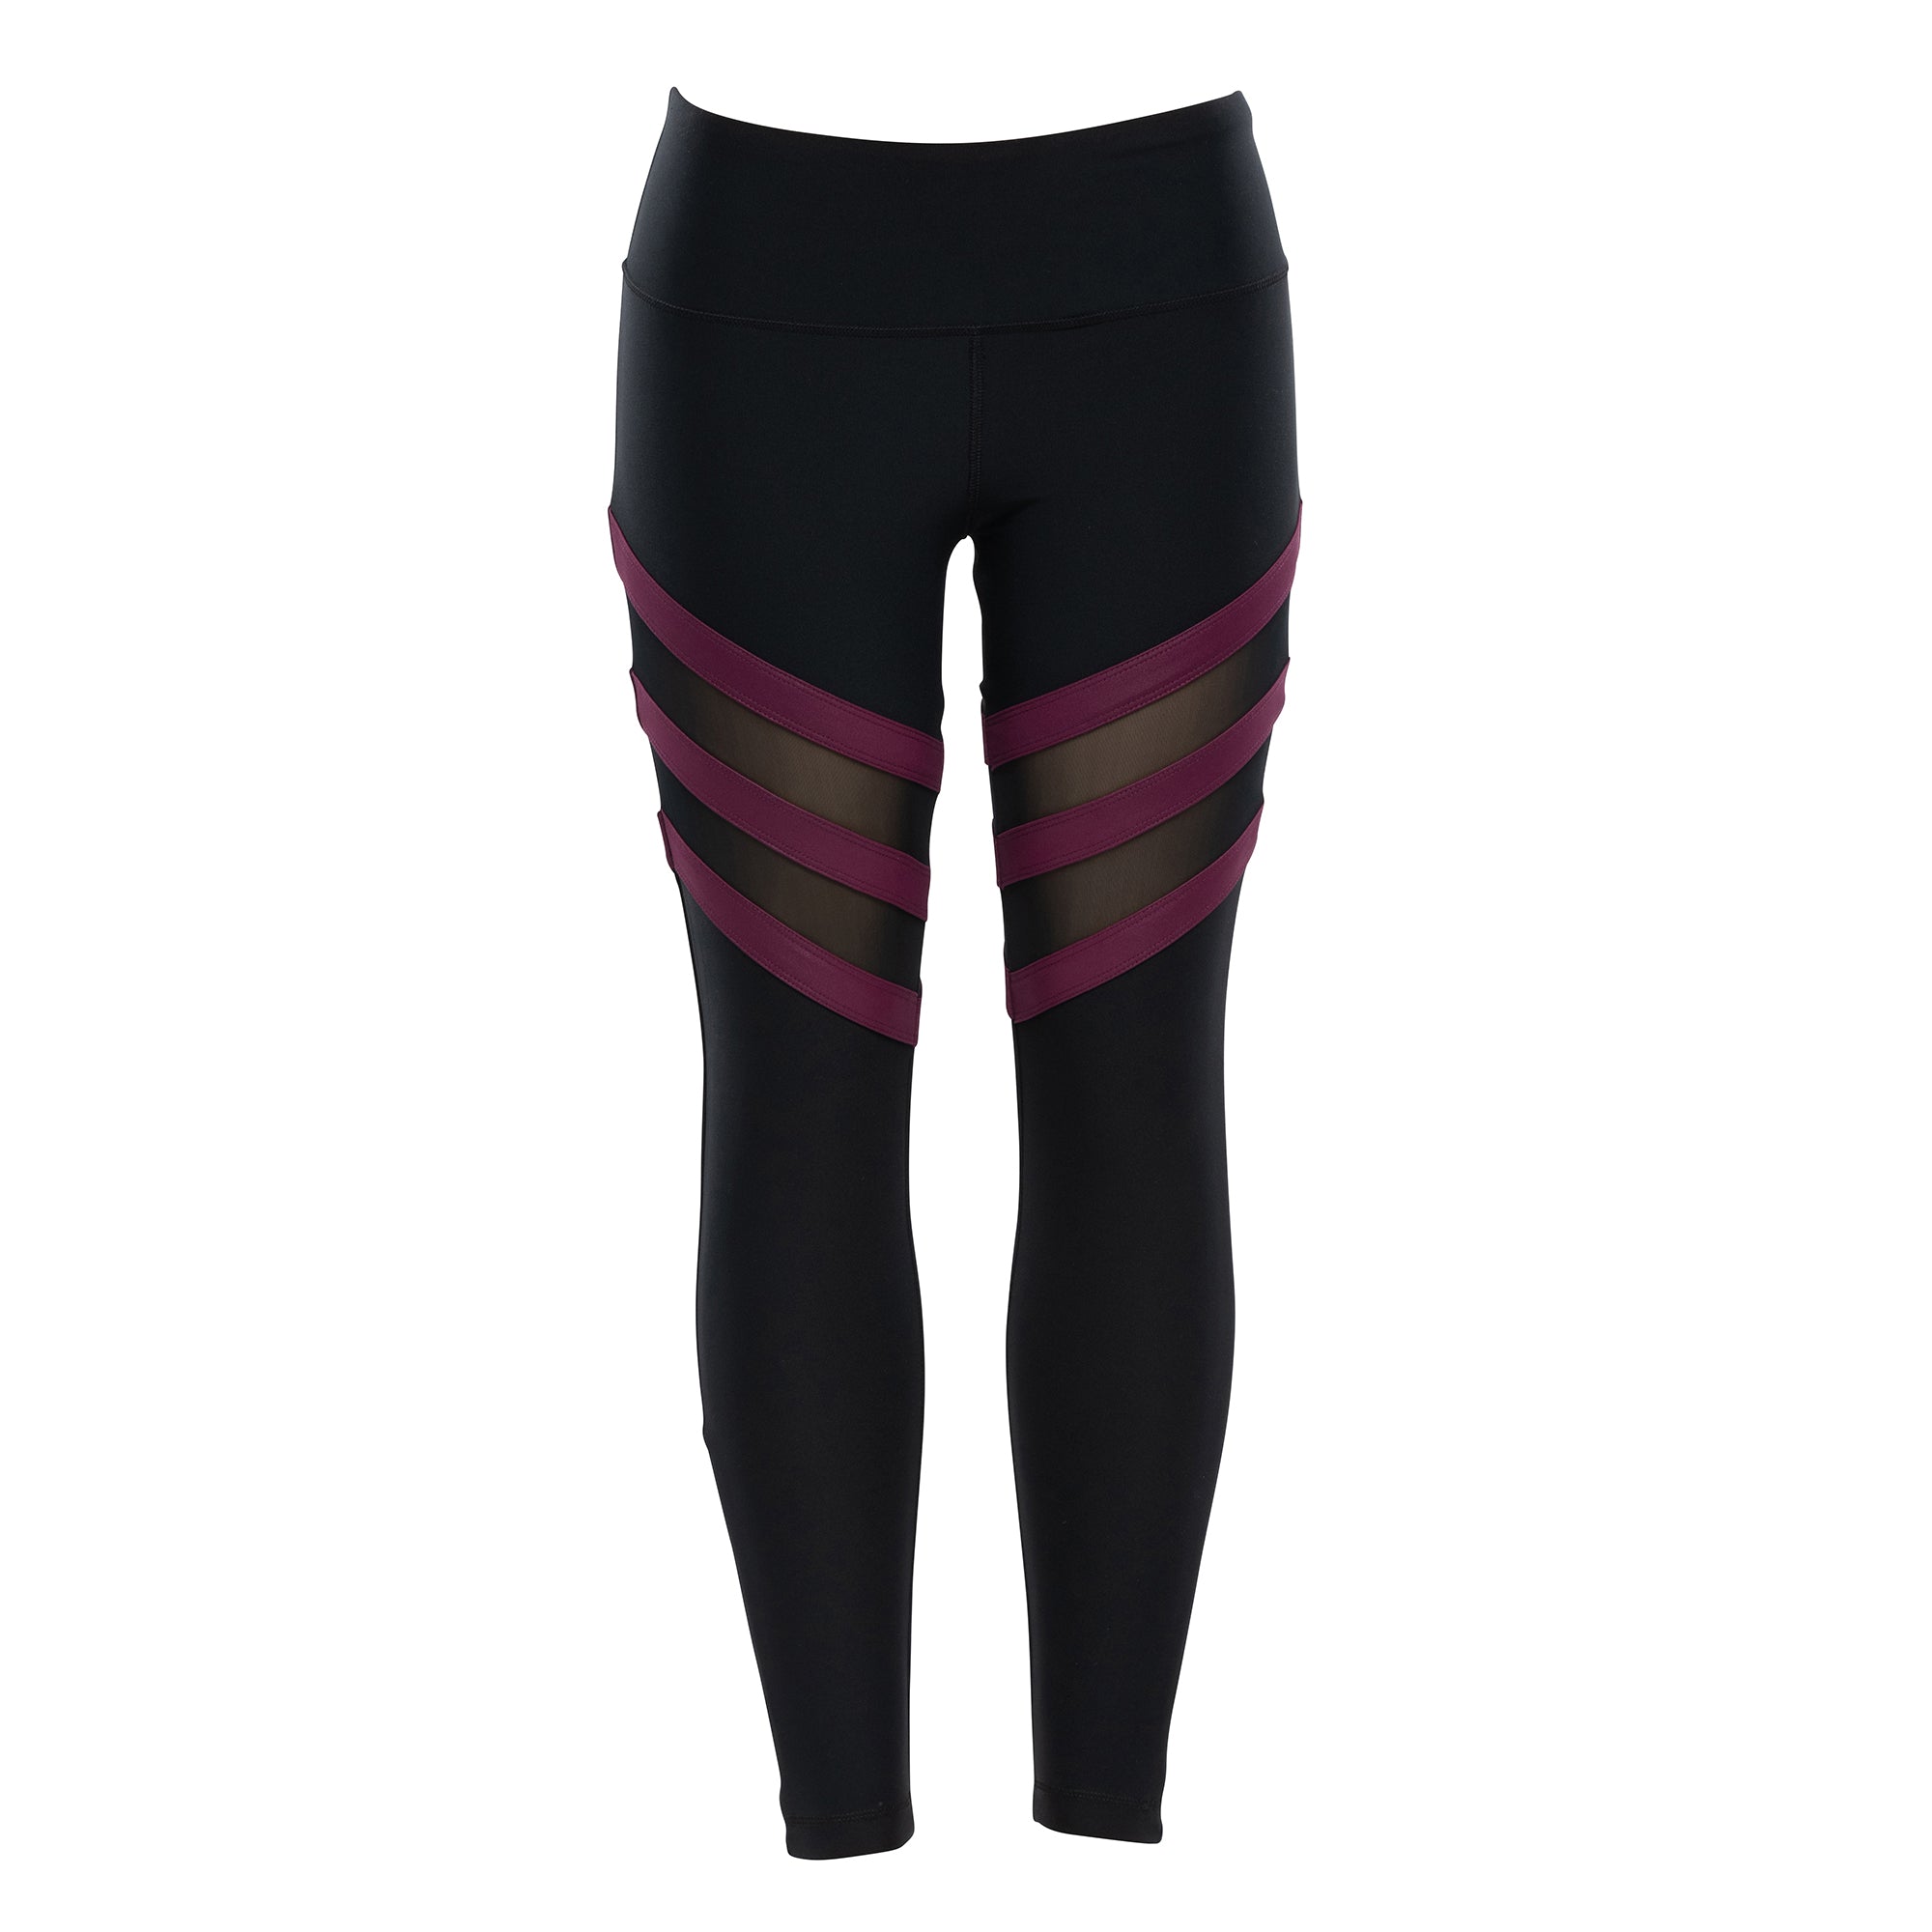 Women's 90 Degree Sport Tights - 1 Color/4 Sizes - 4pcs/pack – Buzz On inc.